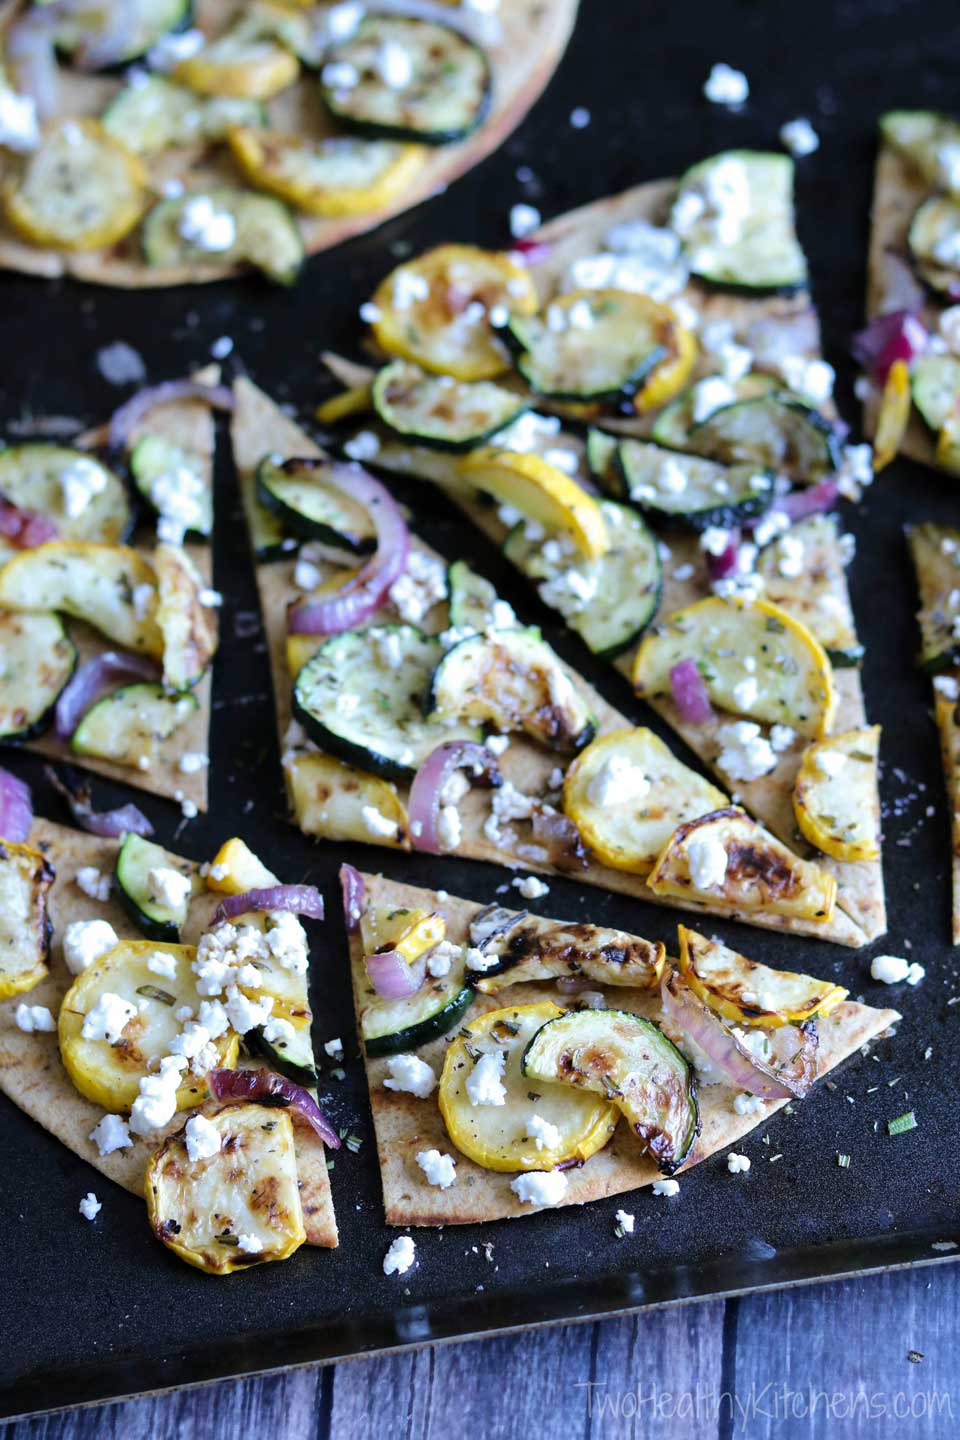 Easy and incredibly flavorful, with just a few simple ingredients! This Grilled Zucchini Flatbread recipe is perfect served as an impressive, hearty appetizer, or combined with a salad for lunch or an easy dinner! If you need zucchini recipes to use up extra zucchini, this quick grilled flatbread recipe is ideal! With creamy goat cheese and grilled vegetables, it’s like a grilled pizza with the crispy cracker-thin crust of a flatbread! A great 30-minute meal! {ad} | www.TwoHealthyKitchens.com